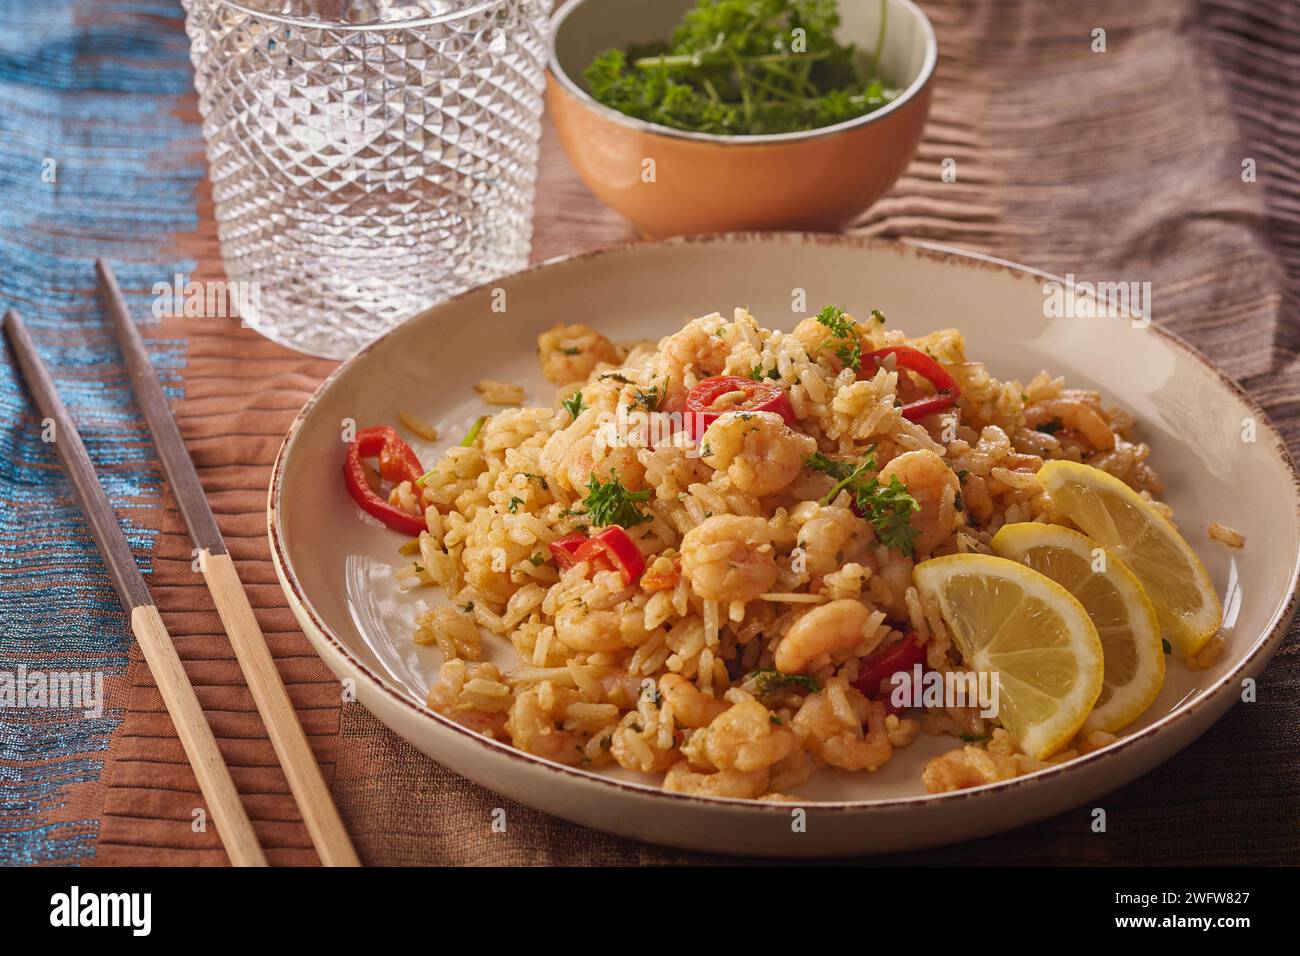 Spicy prawn stir fry with rice garnished with herbs. Stock Photo